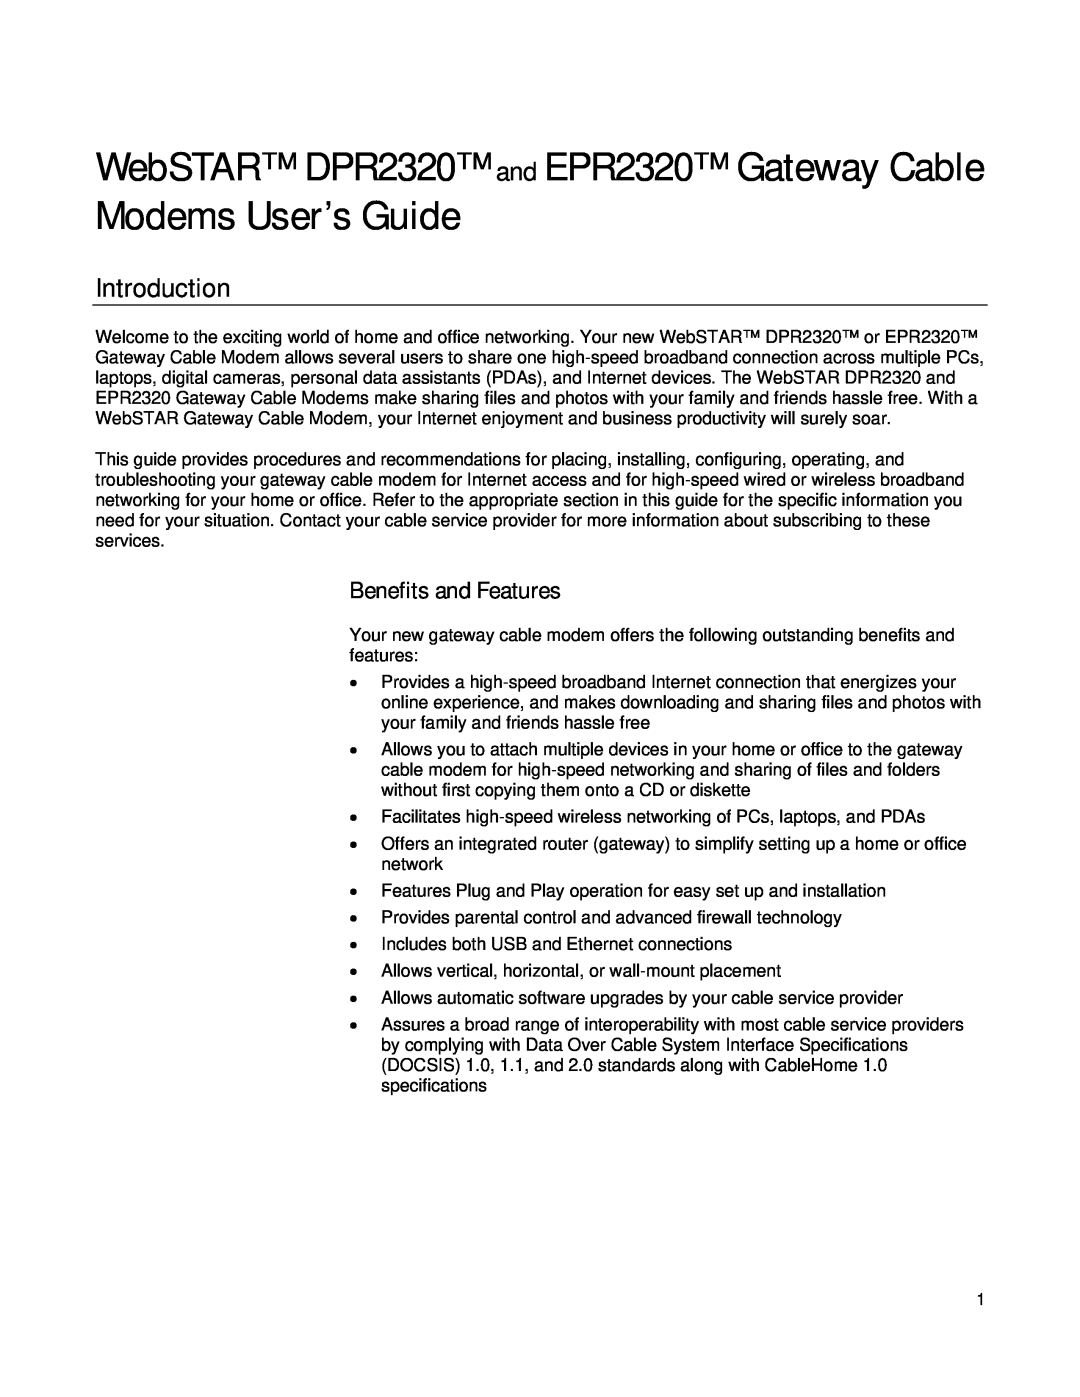 Apple EPR2320TM manual Introduction, Benefits and Features, WebSTAR DPR2320 and EPR2320 Gateway Cable Modems User’s Guide 